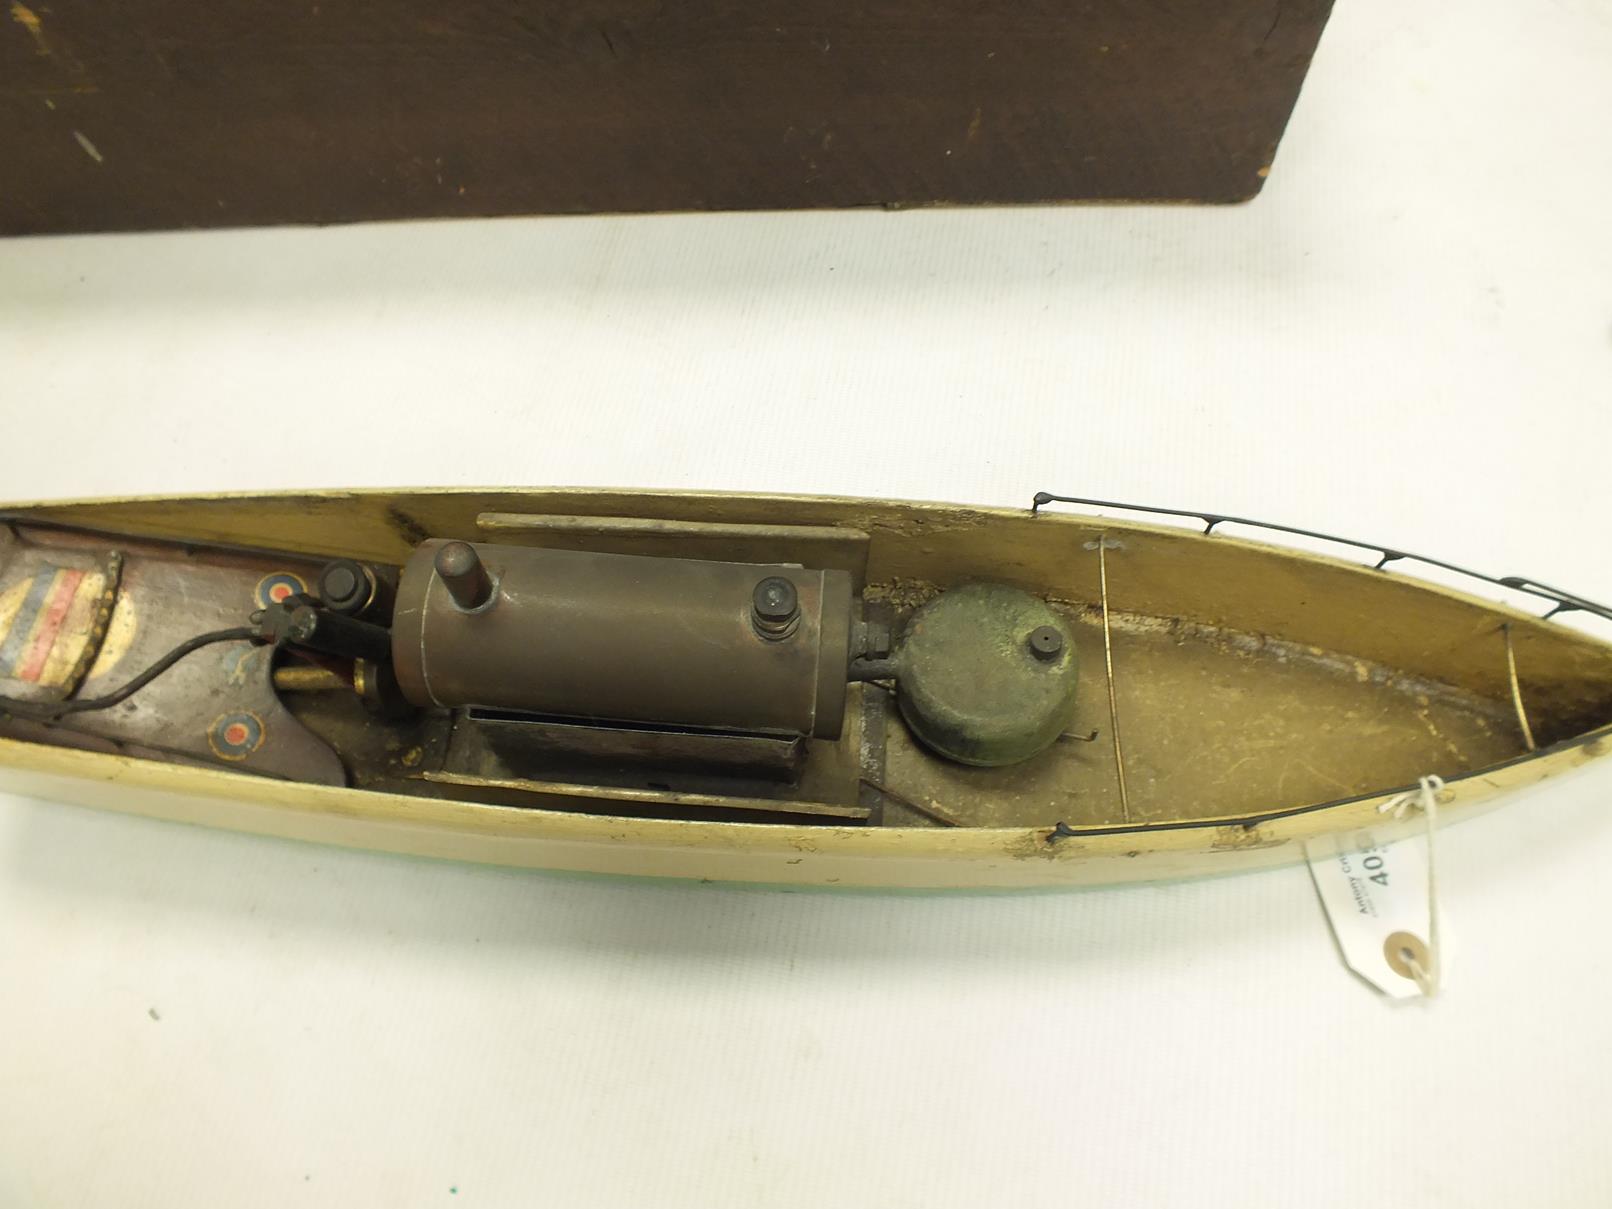 A BOWMAN HOBBIES STEAM SPEEDBOAT "SNIPE", with steam mechanism, the hull painted cream and green ( - Image 7 of 10